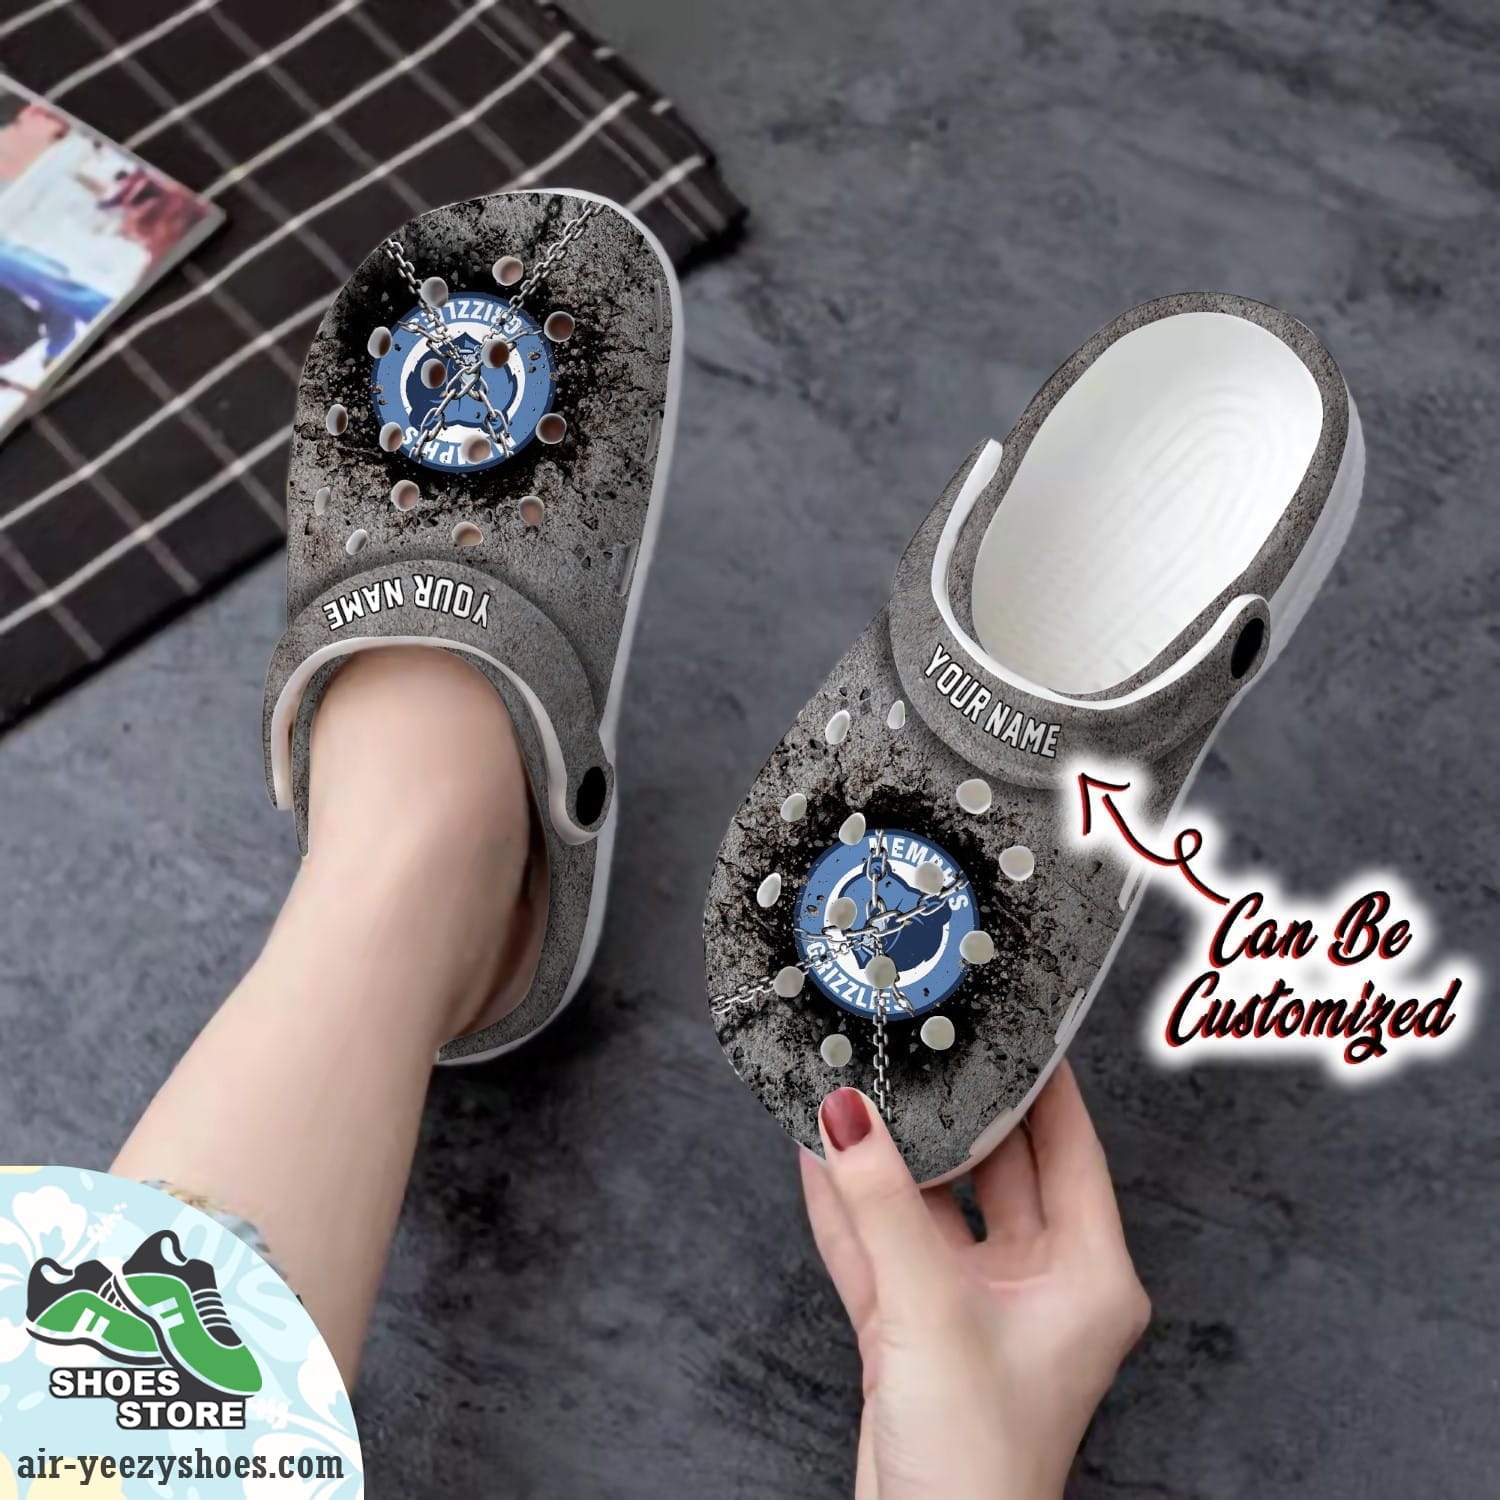 Memphis Grizzlies Personalized Chain Breaking Wall Clog Shoes, Basketball Crocs